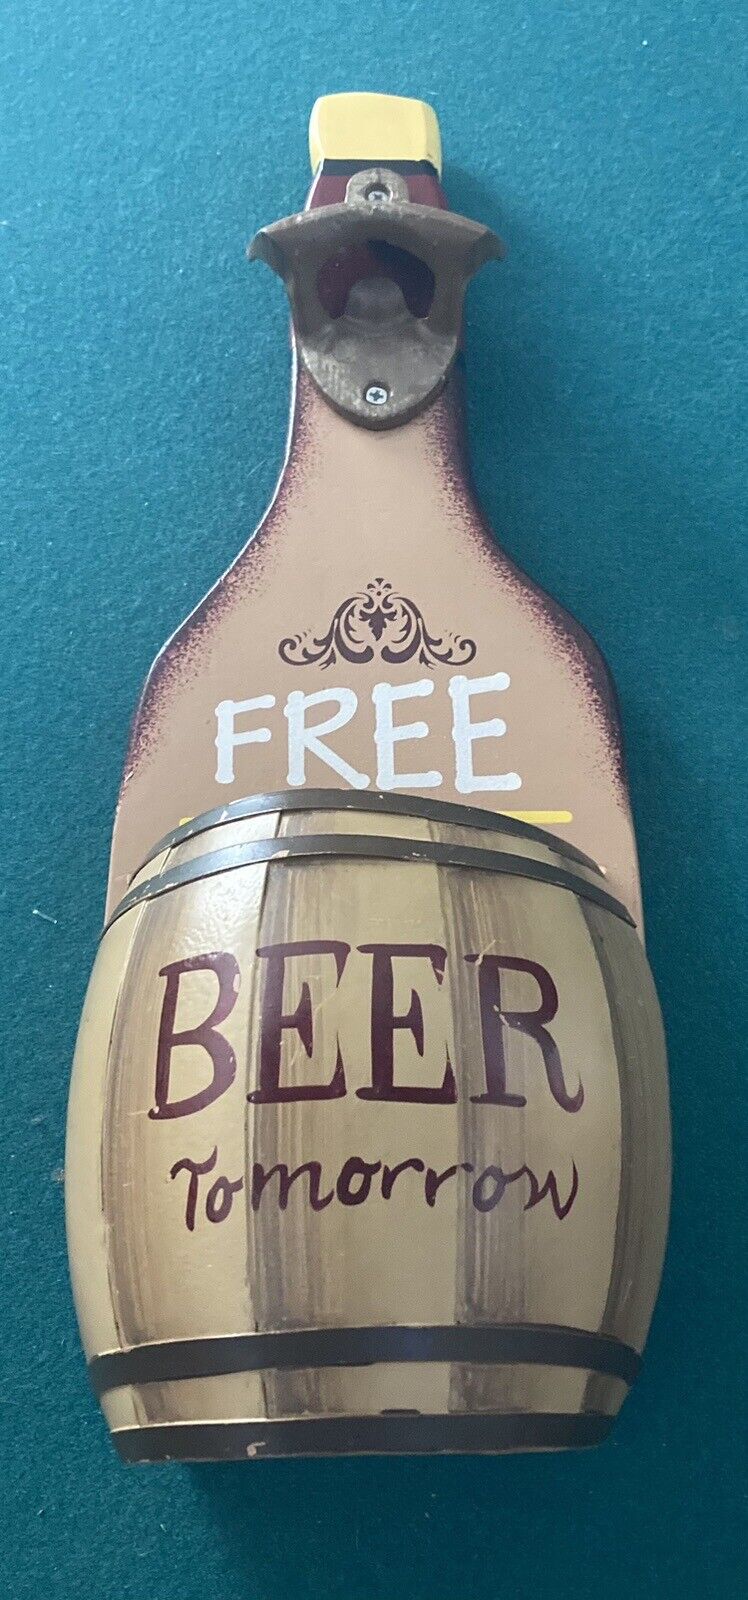 Free Beer Tomorrow Bottle Opener & Sign. Holds the Bottle Tops. Size 14x6inch.